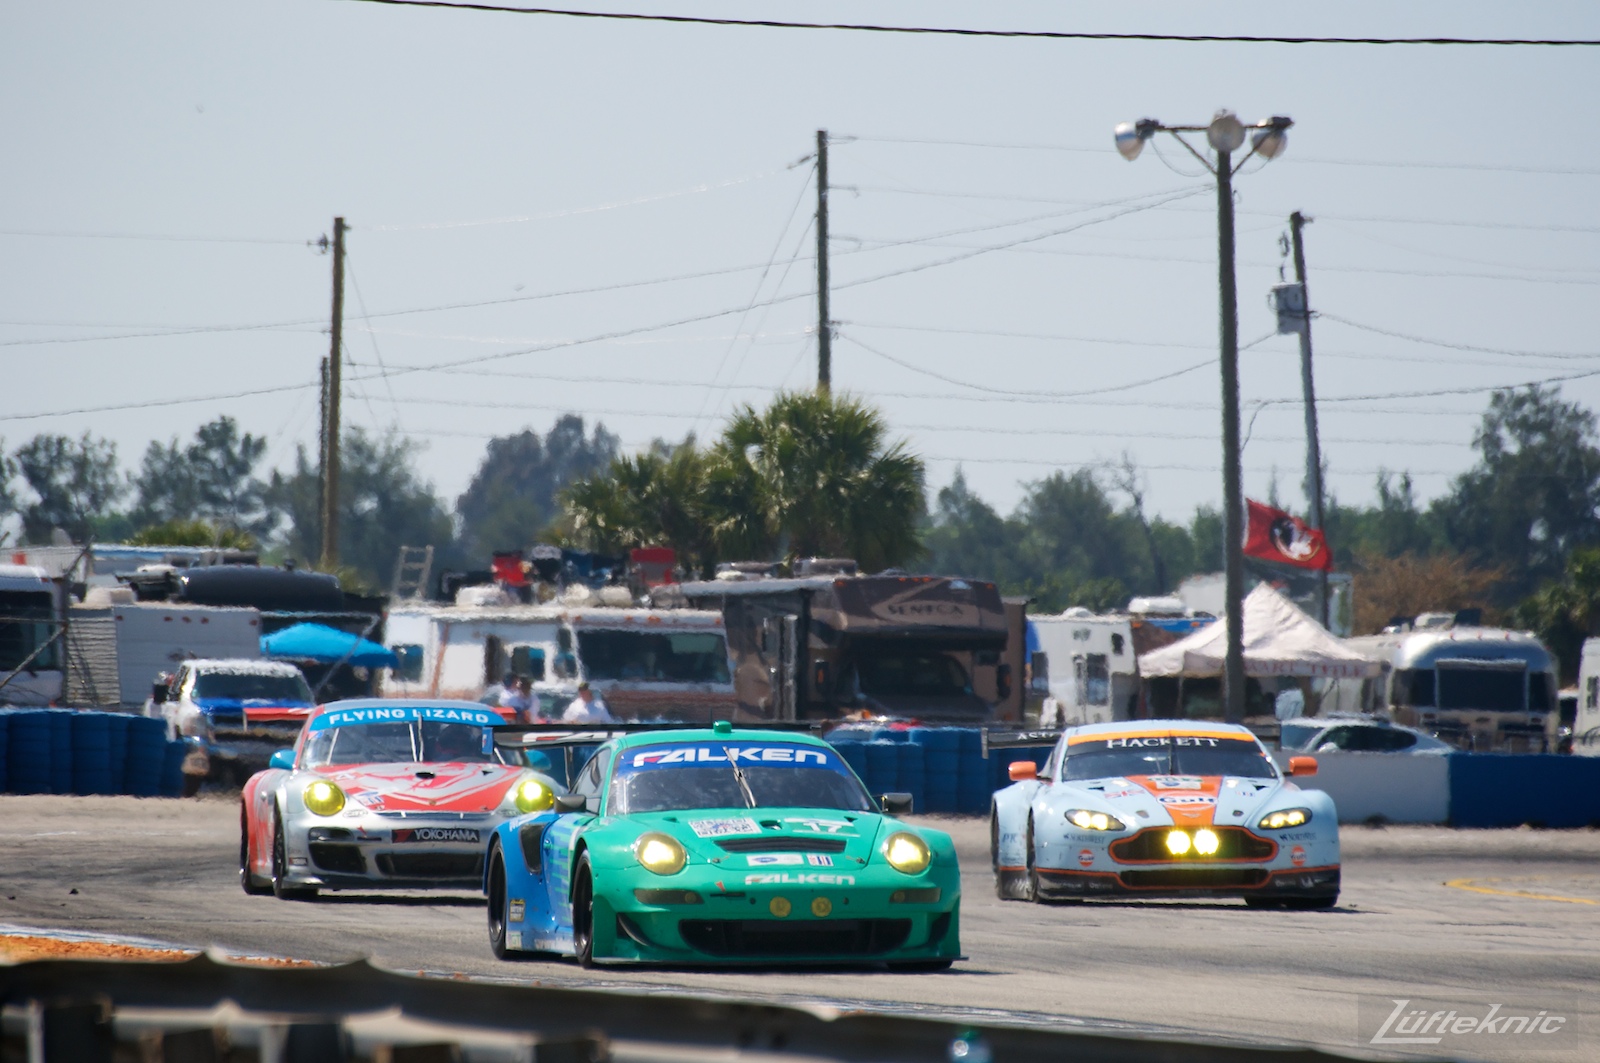 The iconic teal and blue Falken Tire Porsche 911 RSR at Sebring.